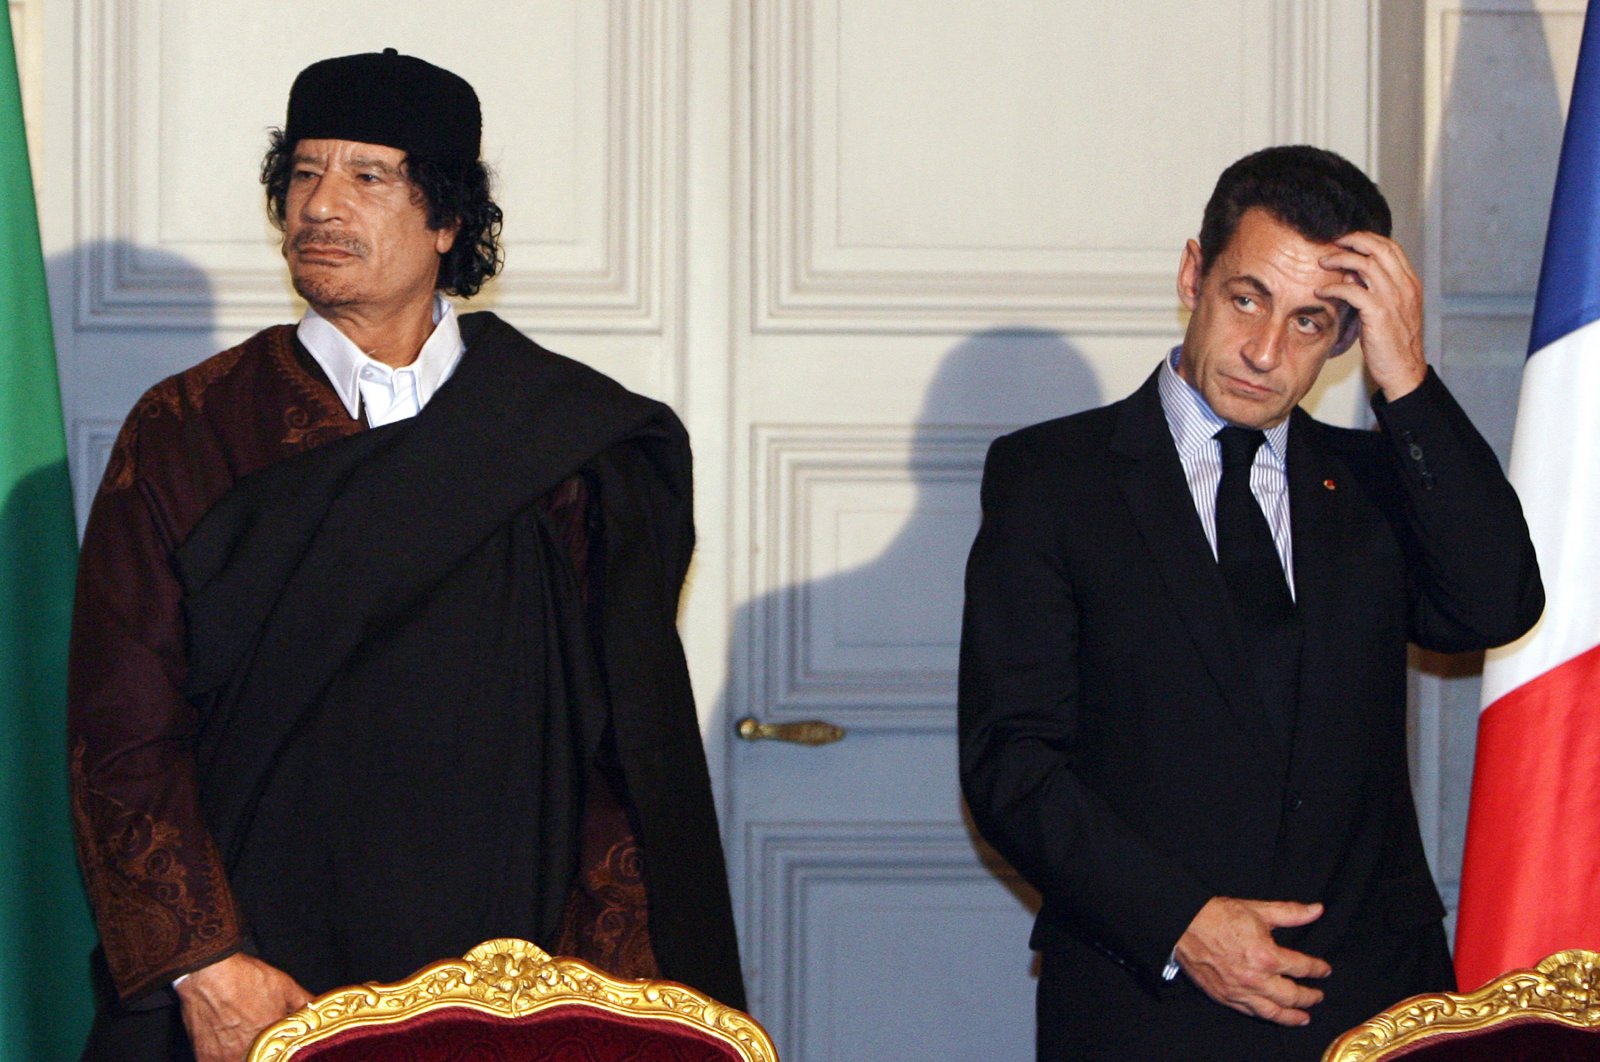 French President Nicolas Sarkozy (R) and Libyan dictator Moammar Gadhafi (L) pose during the signature of trade contracts between the two countries, at the Elysee Palace, in Paris, France, Dec. 10, 2007. (AFP Photo)